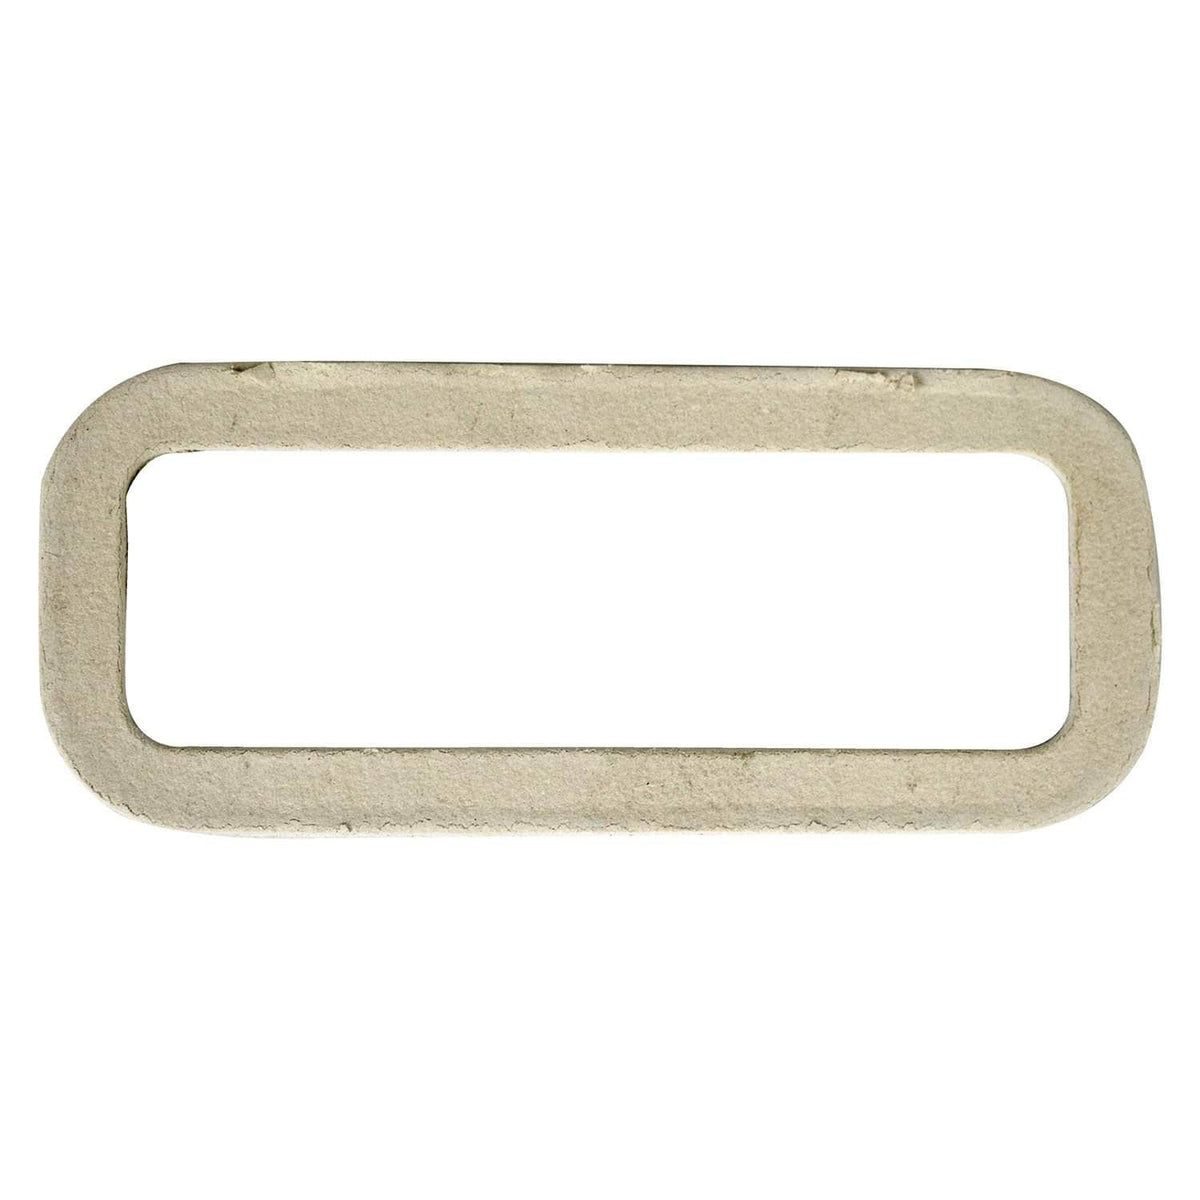 Manifold gasket for use with Aga range cookers